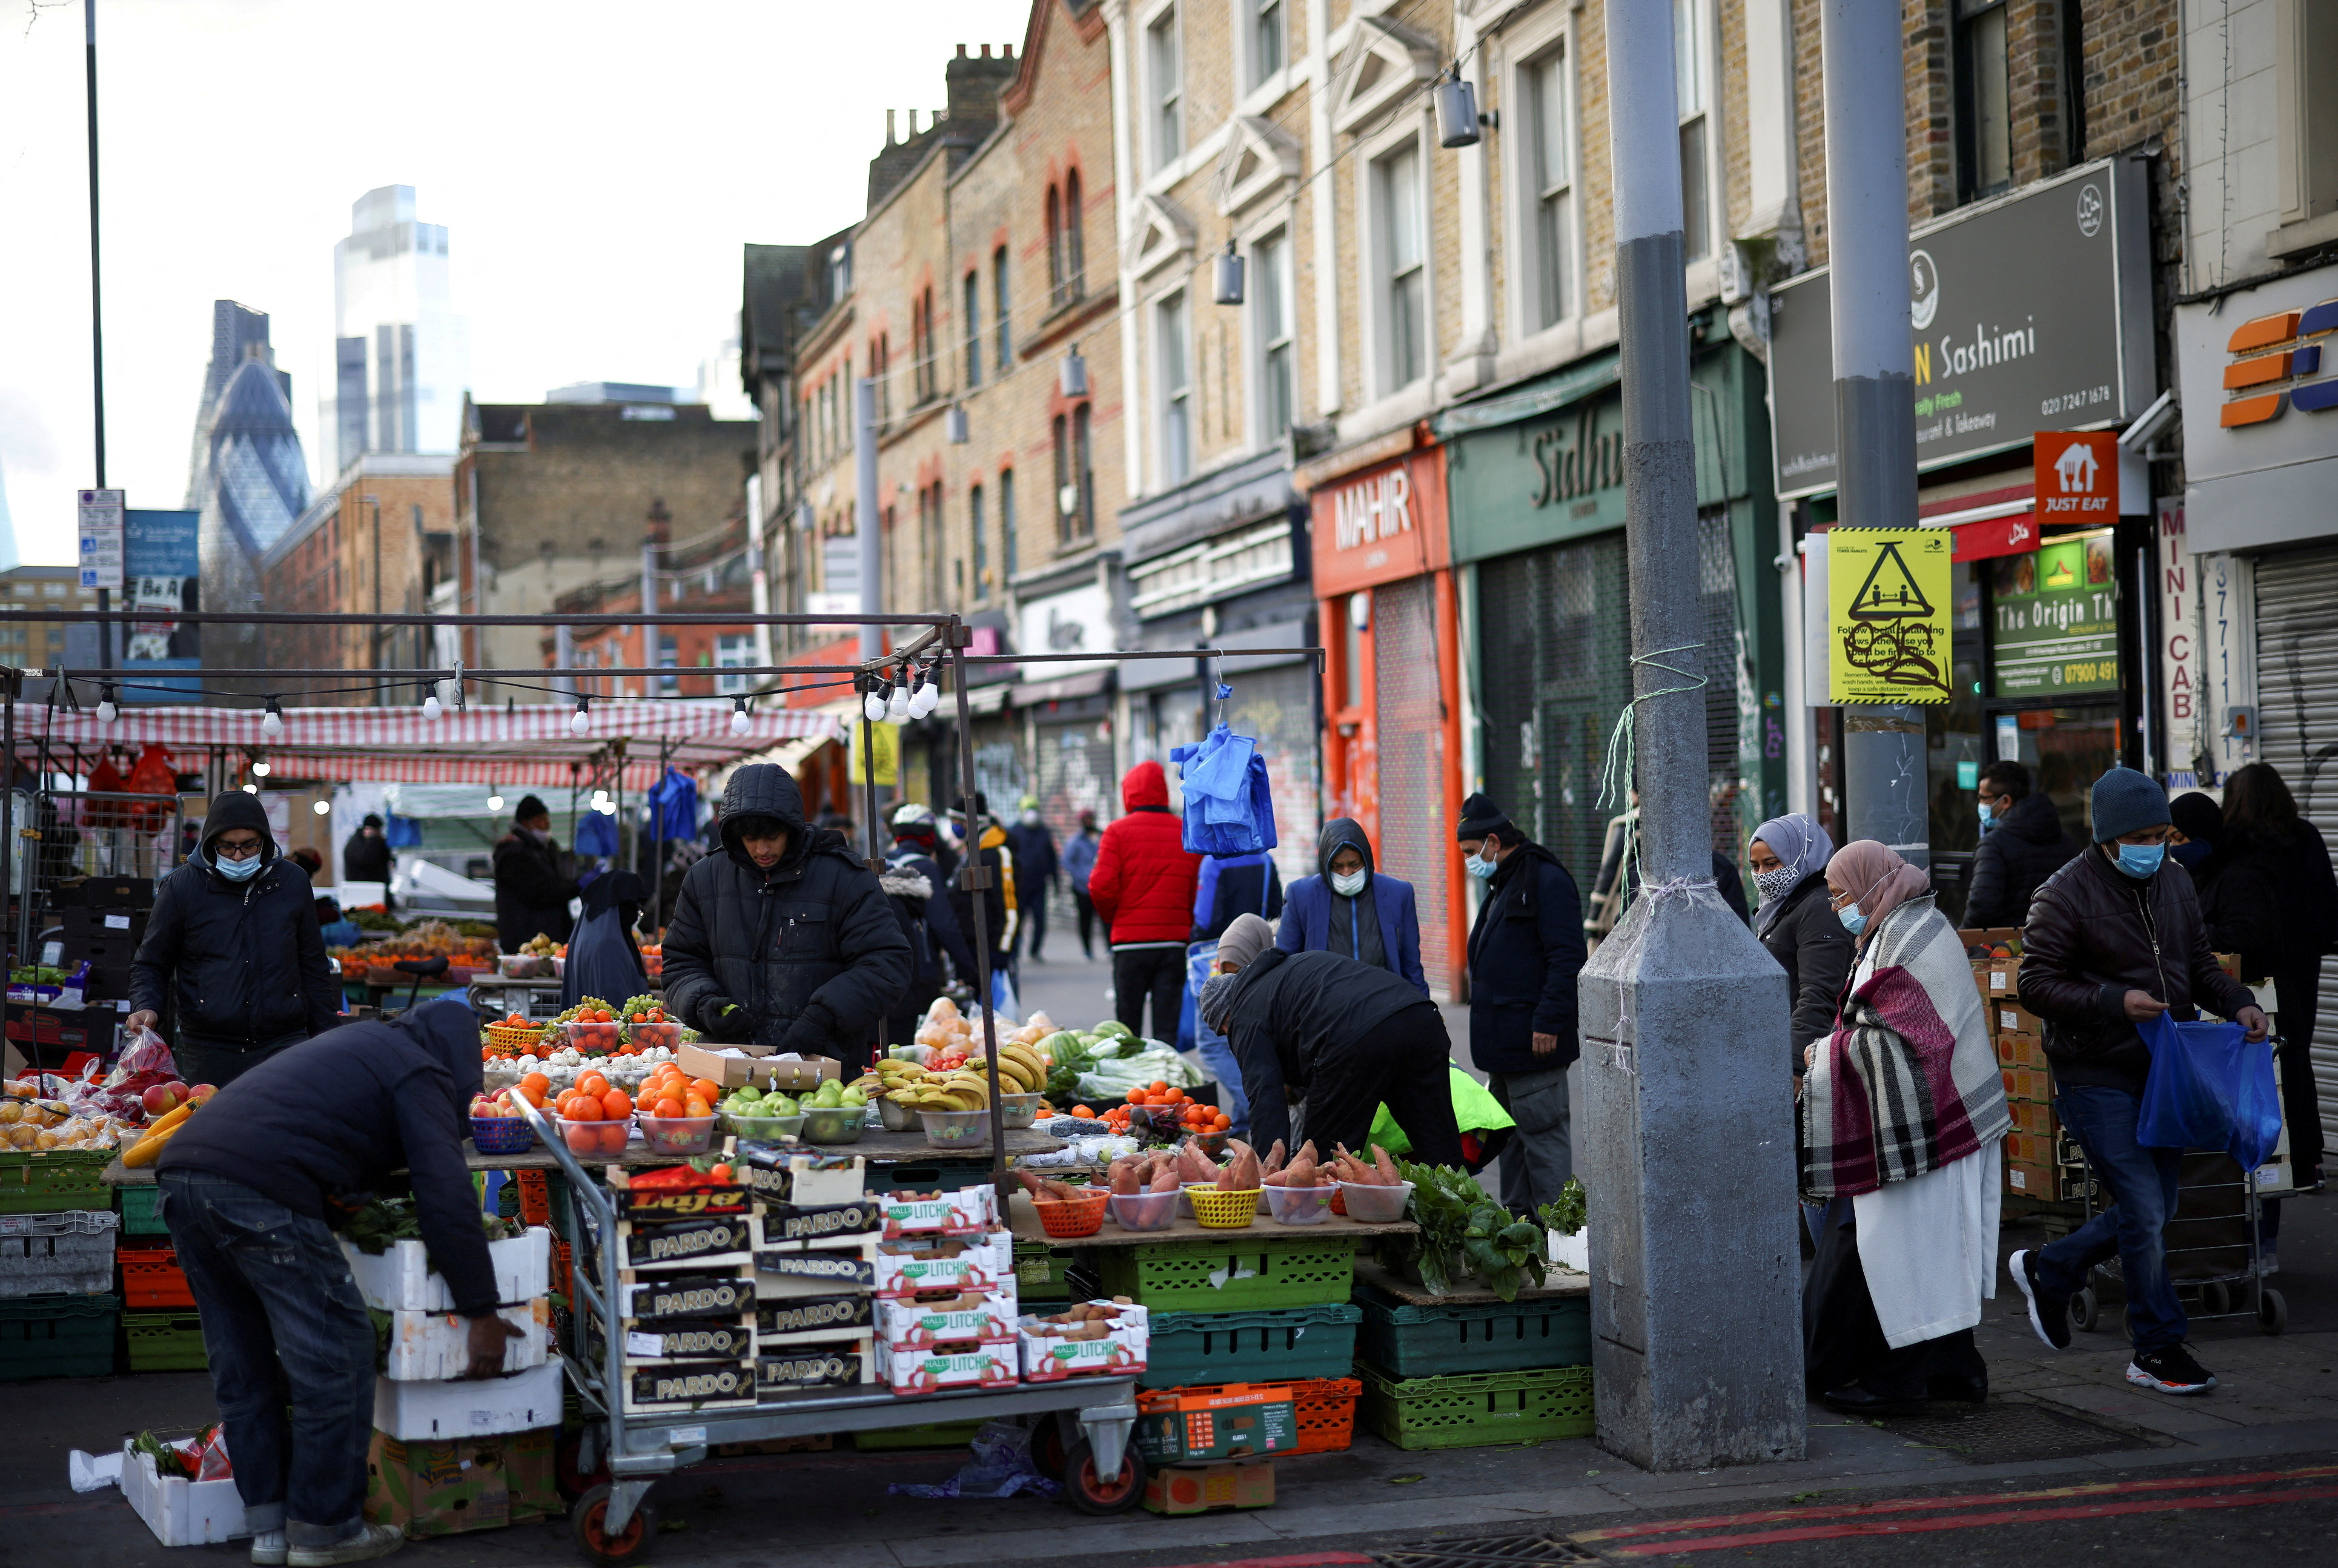 People shop at a market stalls in east London